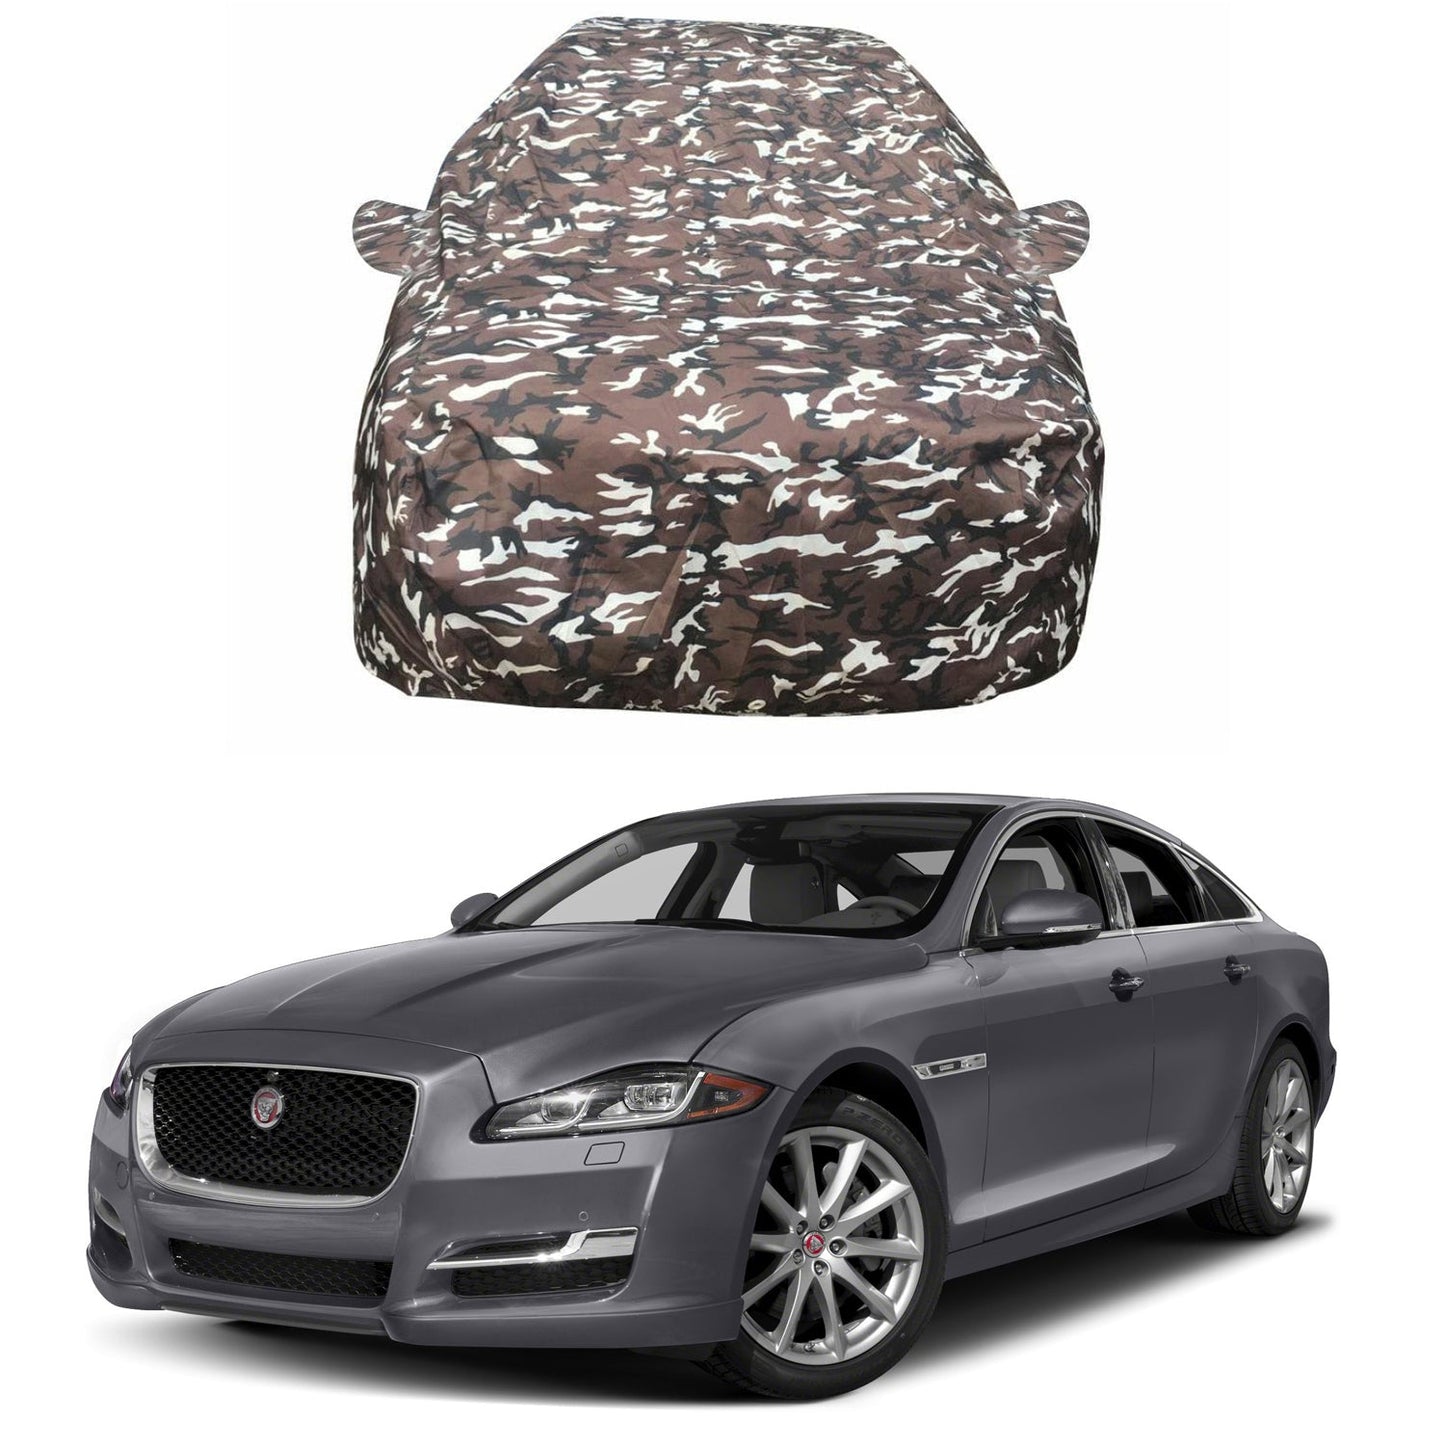 Oshotto Ranger Design Made of 100% Waterproof Fabric Multicolor Car Body Cover with Mirror Pockets For Jaguar XJ/XJL